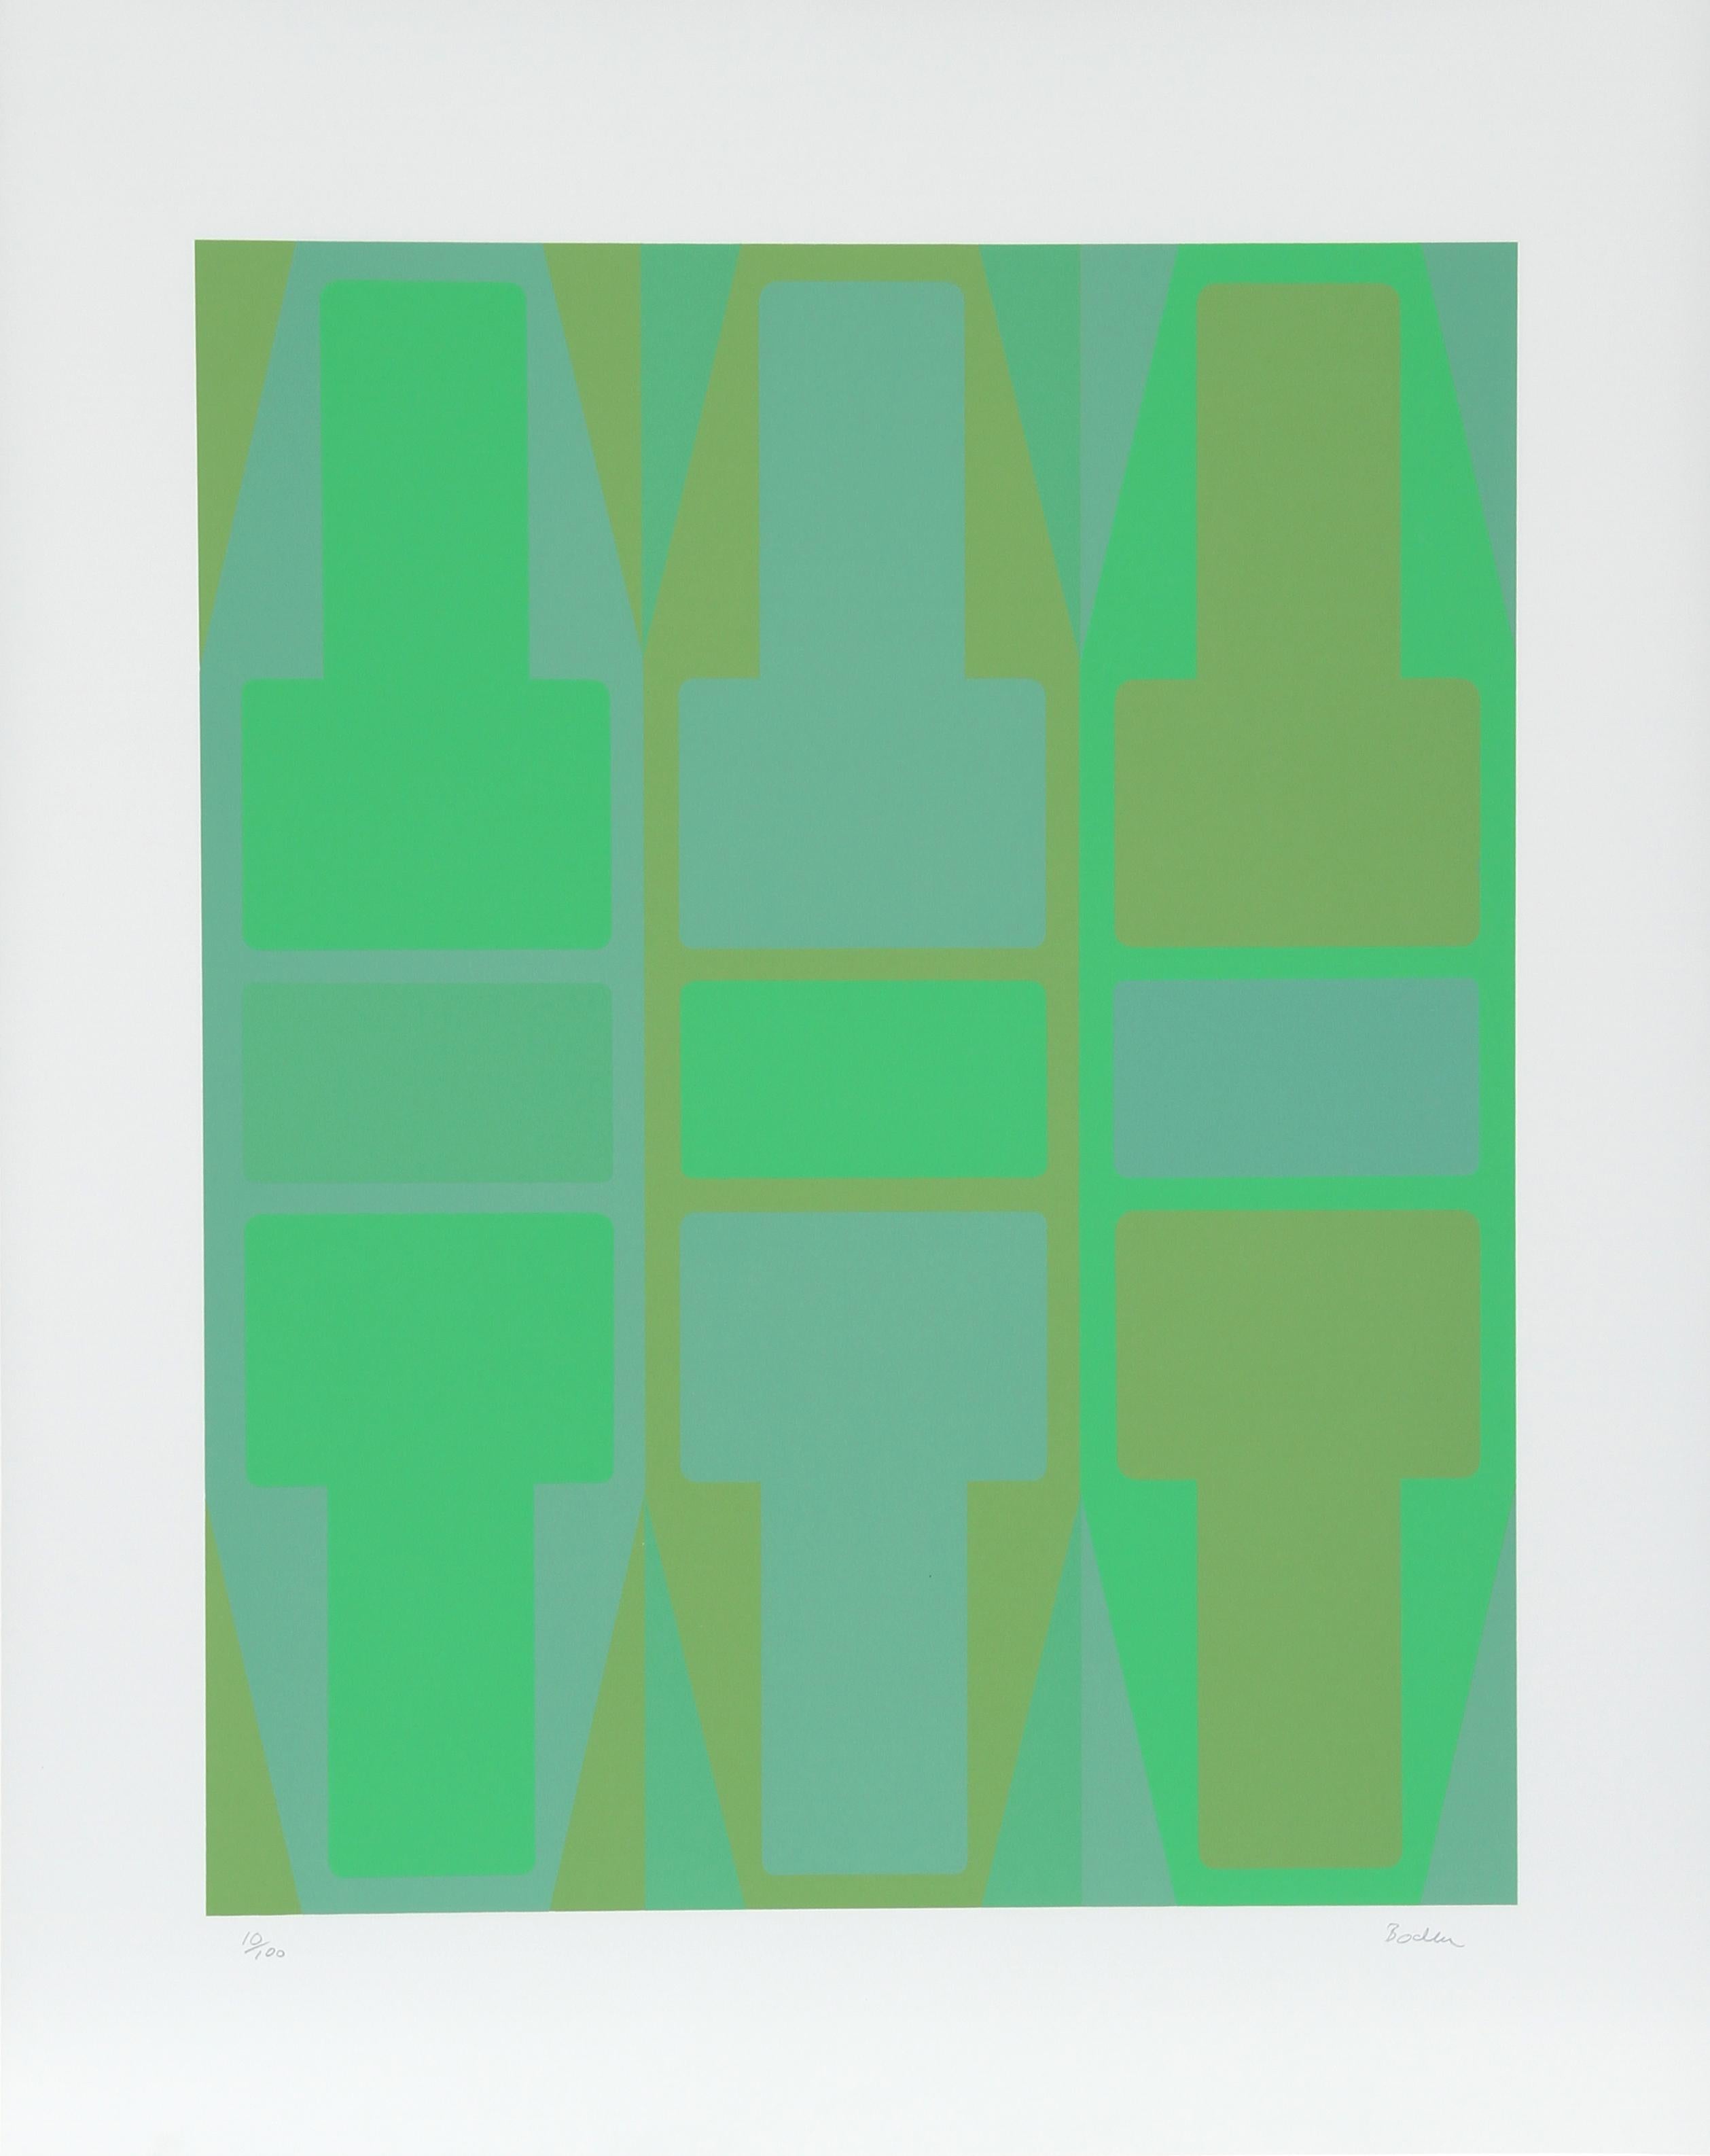 Artist: Arthur Boden, American
Title: T Series (Green)
Year:  circa 1970
Medium:  Serigraph, signed and numbered in pencil
Edition:  100
Size:  29 in. x 23 in. (73.66 cm x 58.42 cm) 